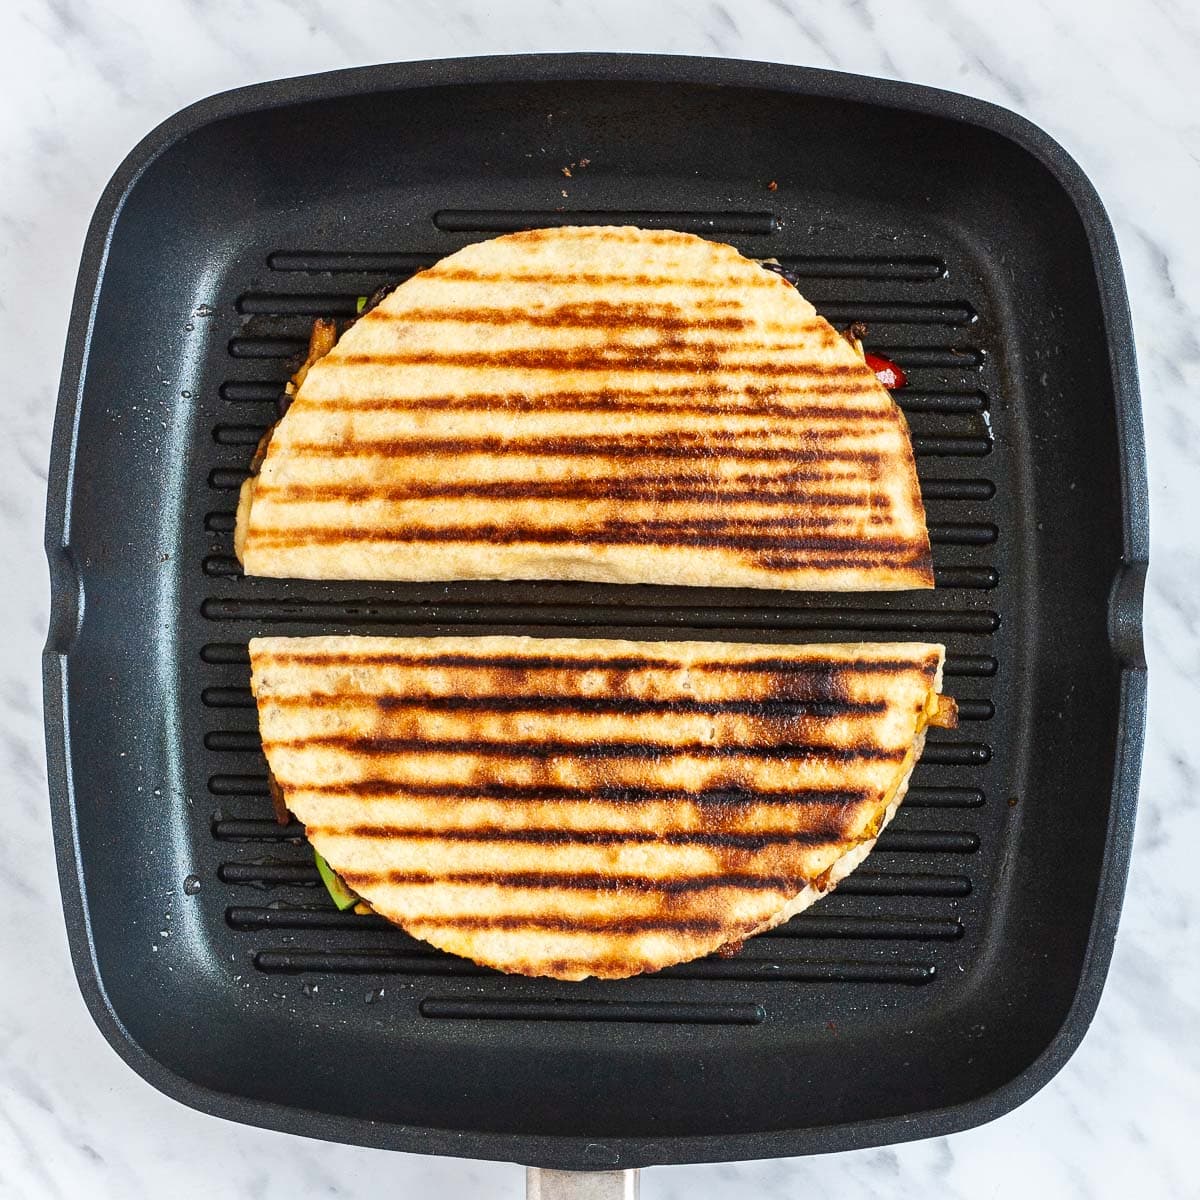 Two folded tortilla is frying on a grill pan.